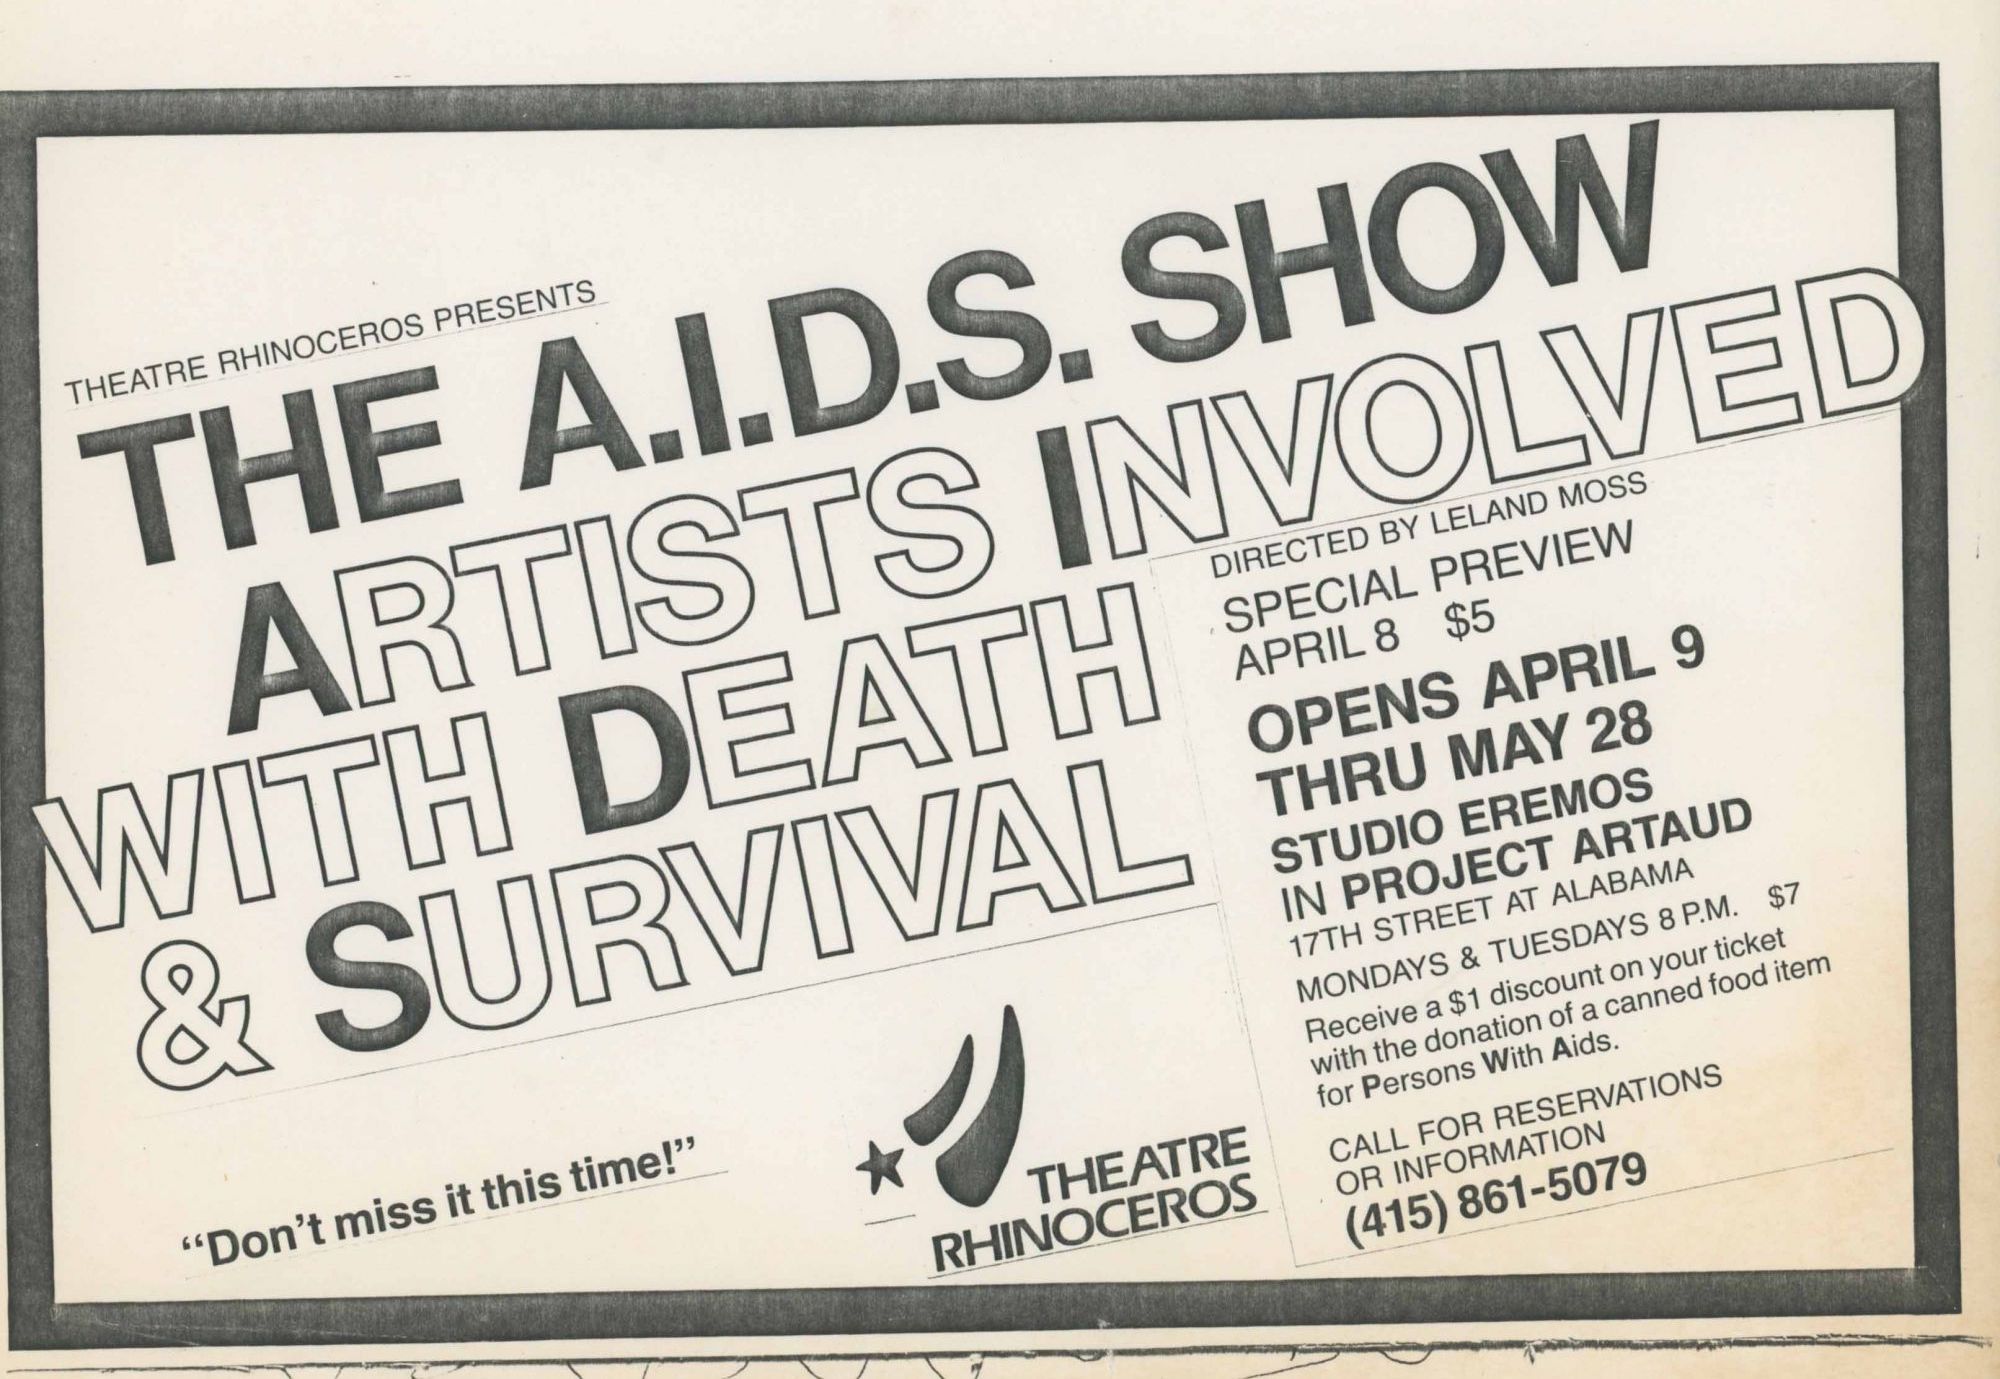 Poster for The AIDS Show: Artists Involved with Death and Survival